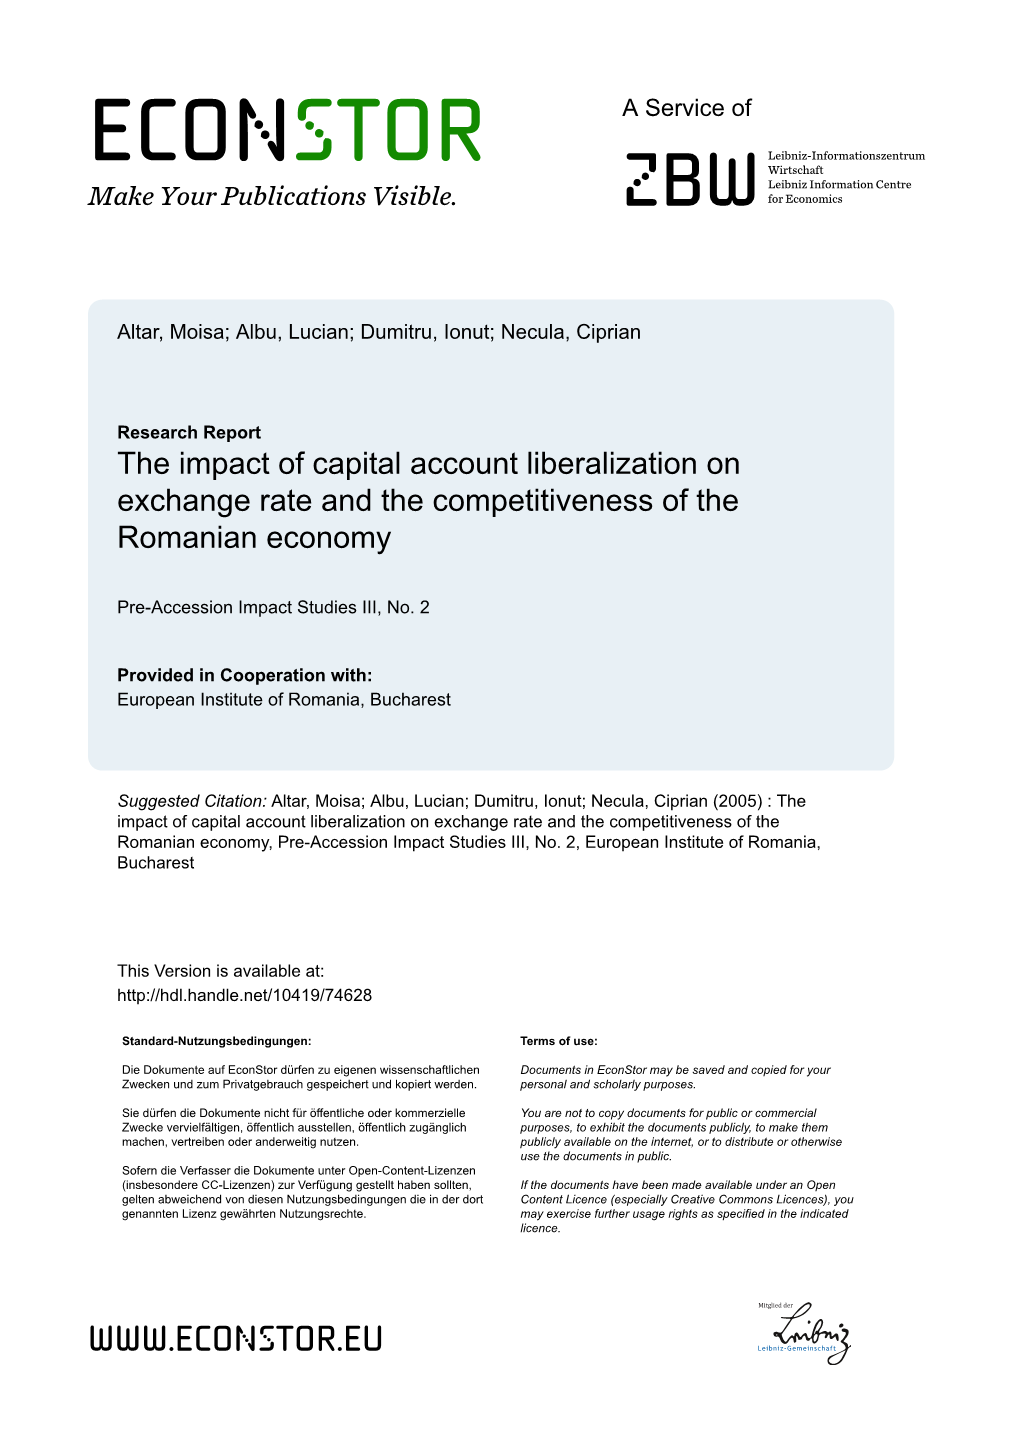 The Impact of Capital Account Liberalization on Exchange Rate and the Competitiveness of the Romanian Economy